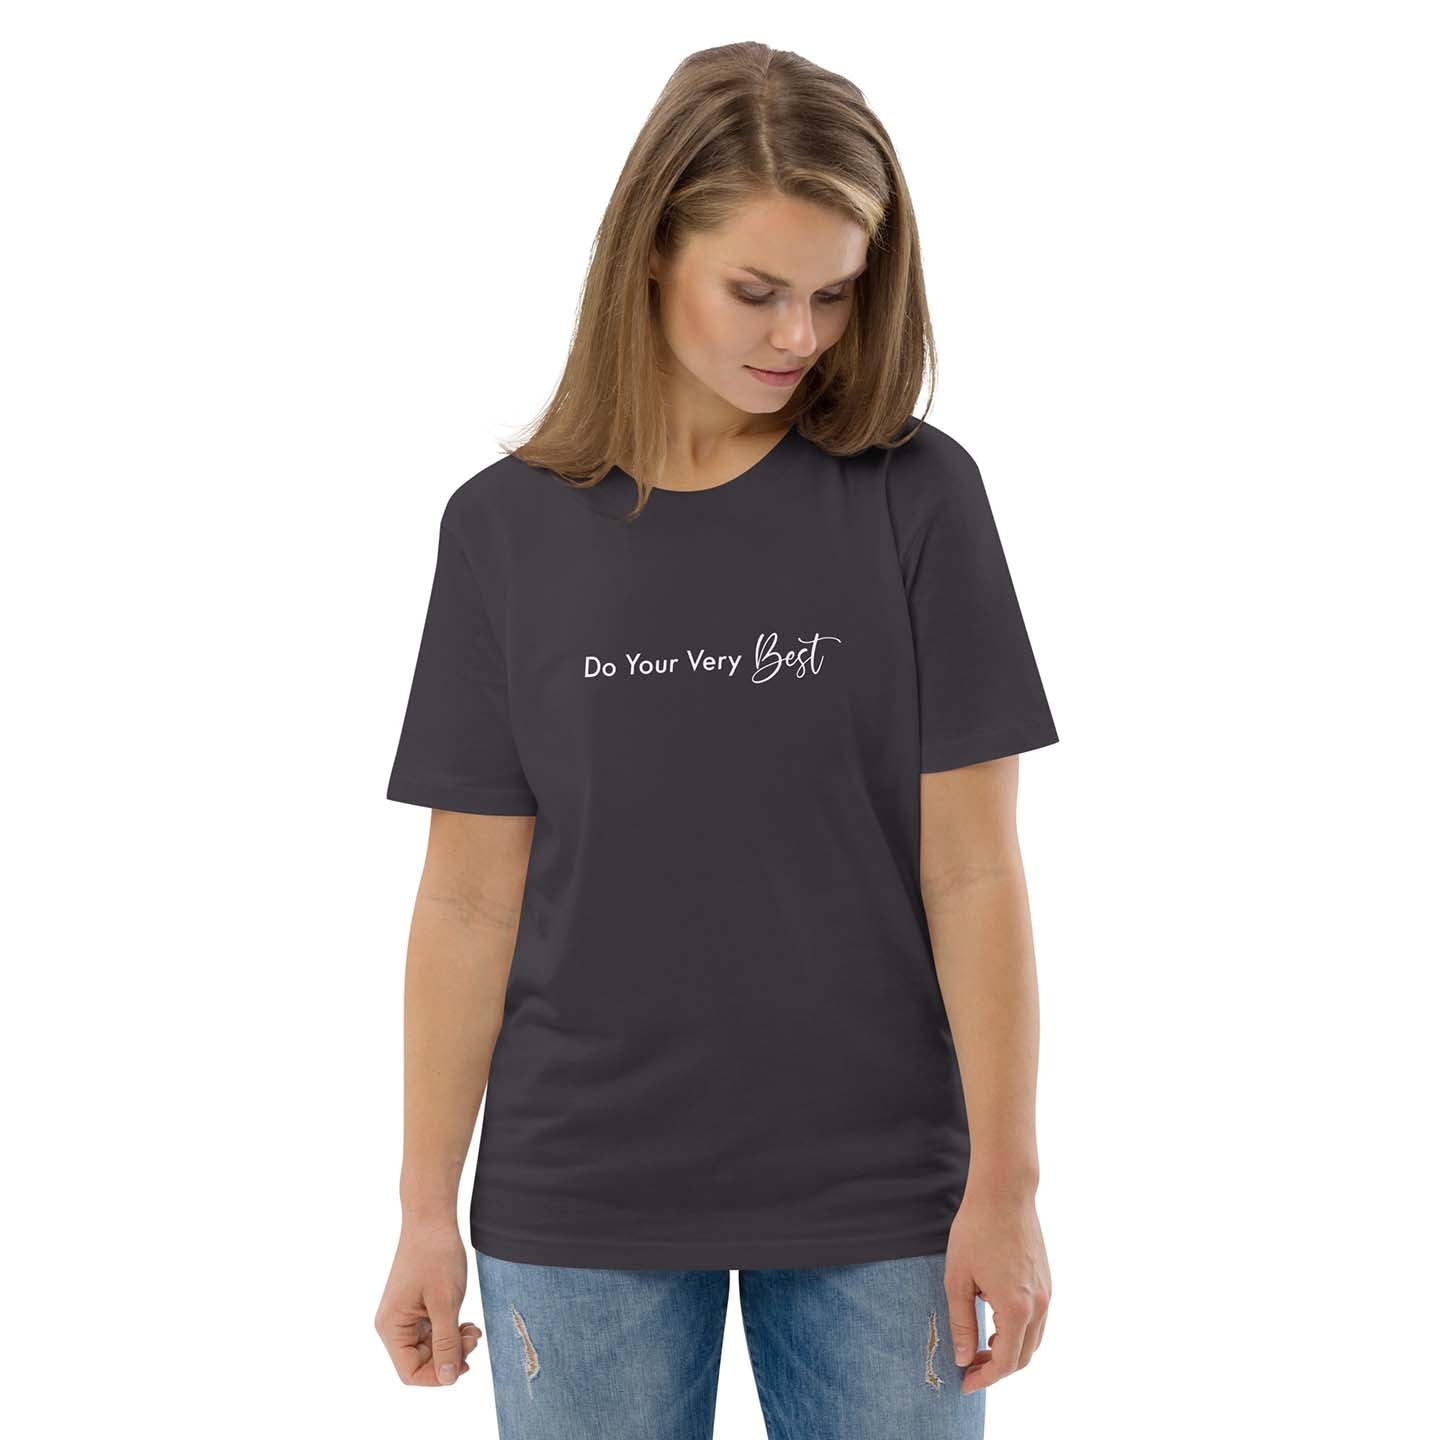 Women dark gray 100% organic cotton t-shirt with motivational quote, "Do Your Very Best."